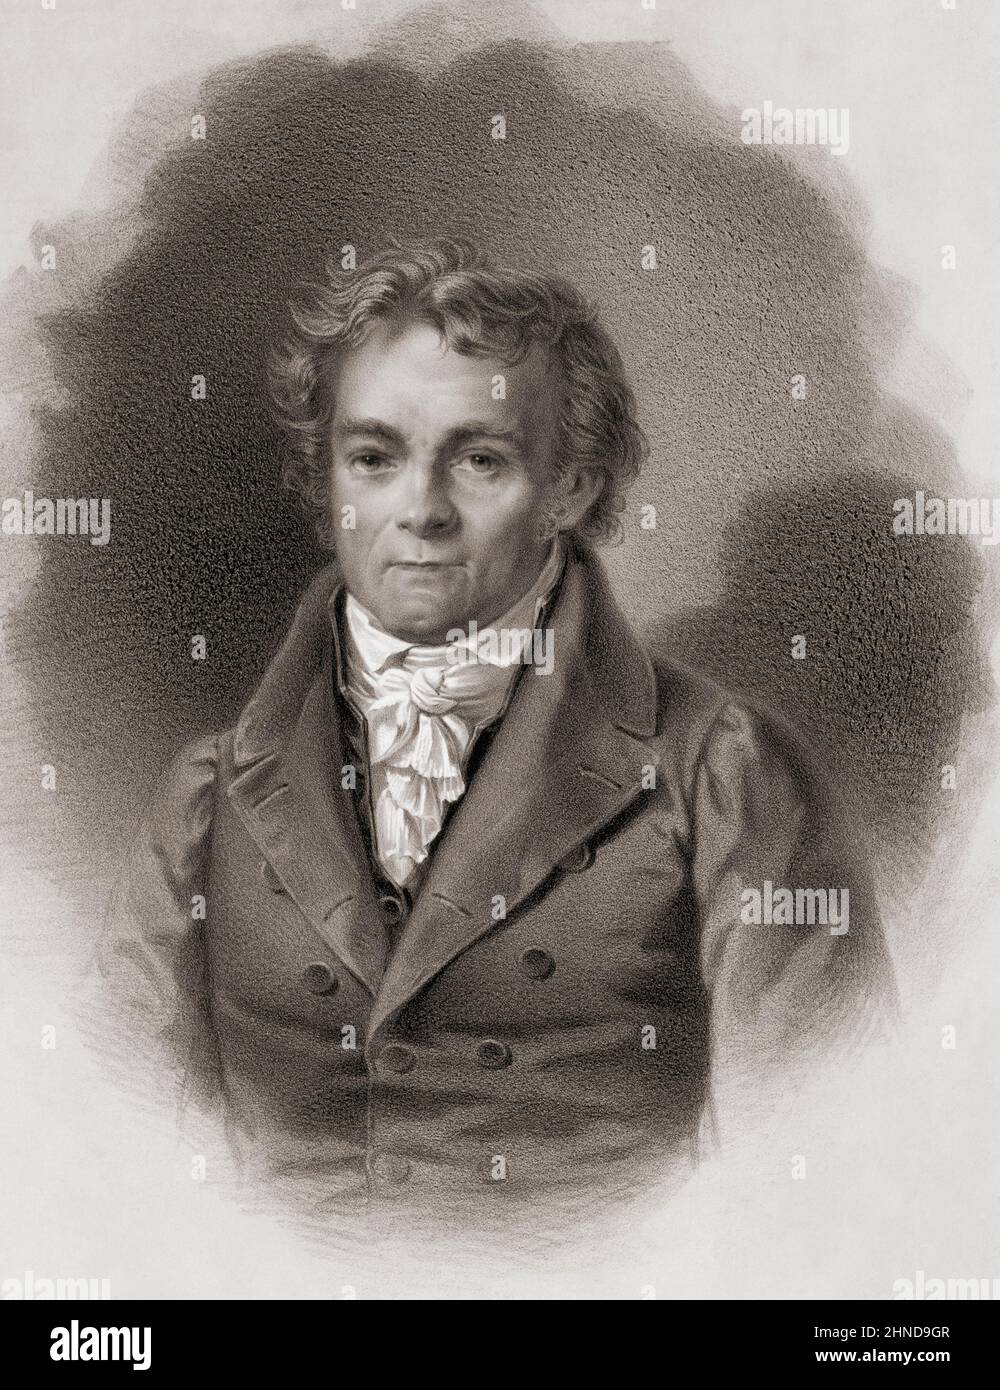 Johann Alois Senefelder, 1771 - 1834.  German actor and playwright who invented the printing technique of lithography after experiencing problems printing his play Mathilde von Altenstein.  He patented his technique throughout Europe.  After a 19th century work by an unidentified artist. Stock Photo